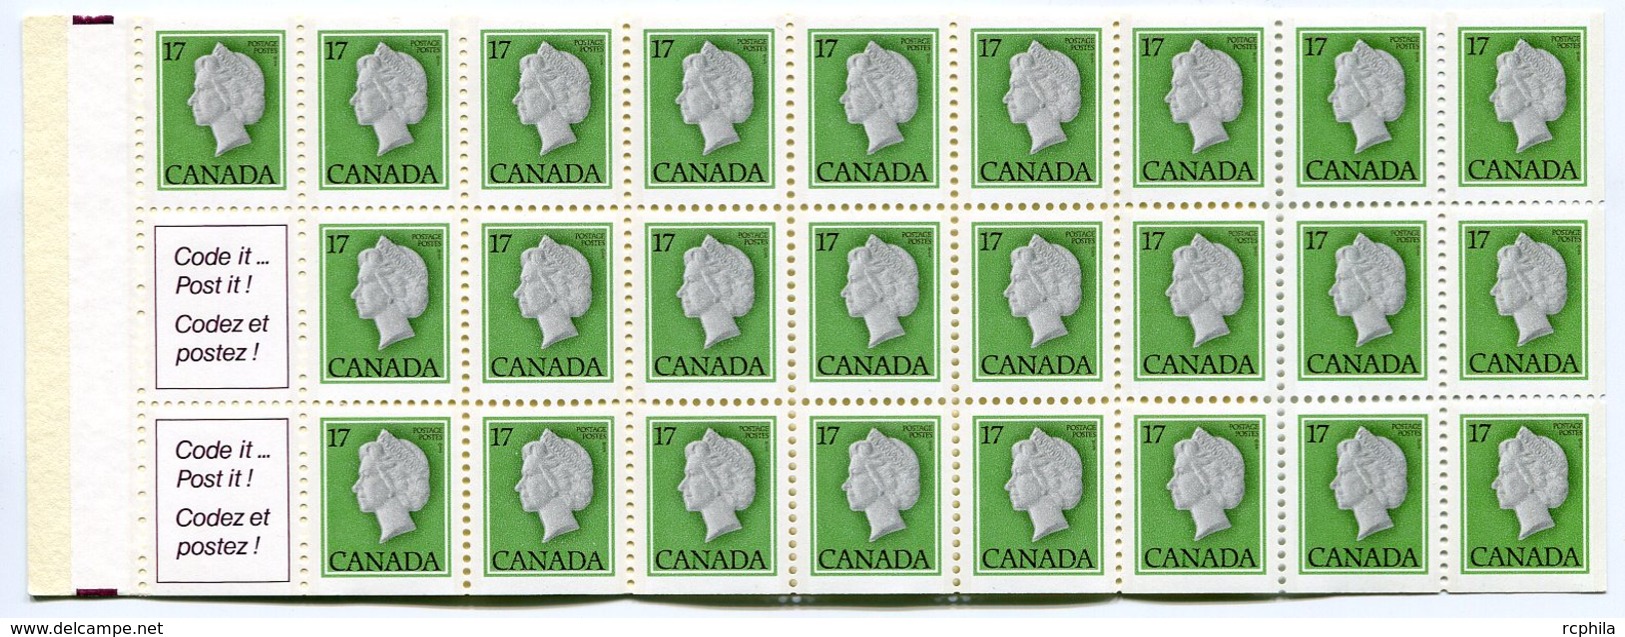 RC 15932 CANADA BK81 PARLIAMENT ISSUE CARNET COMPLET BOOKLET MNH NEUF ** - Carnets Complets